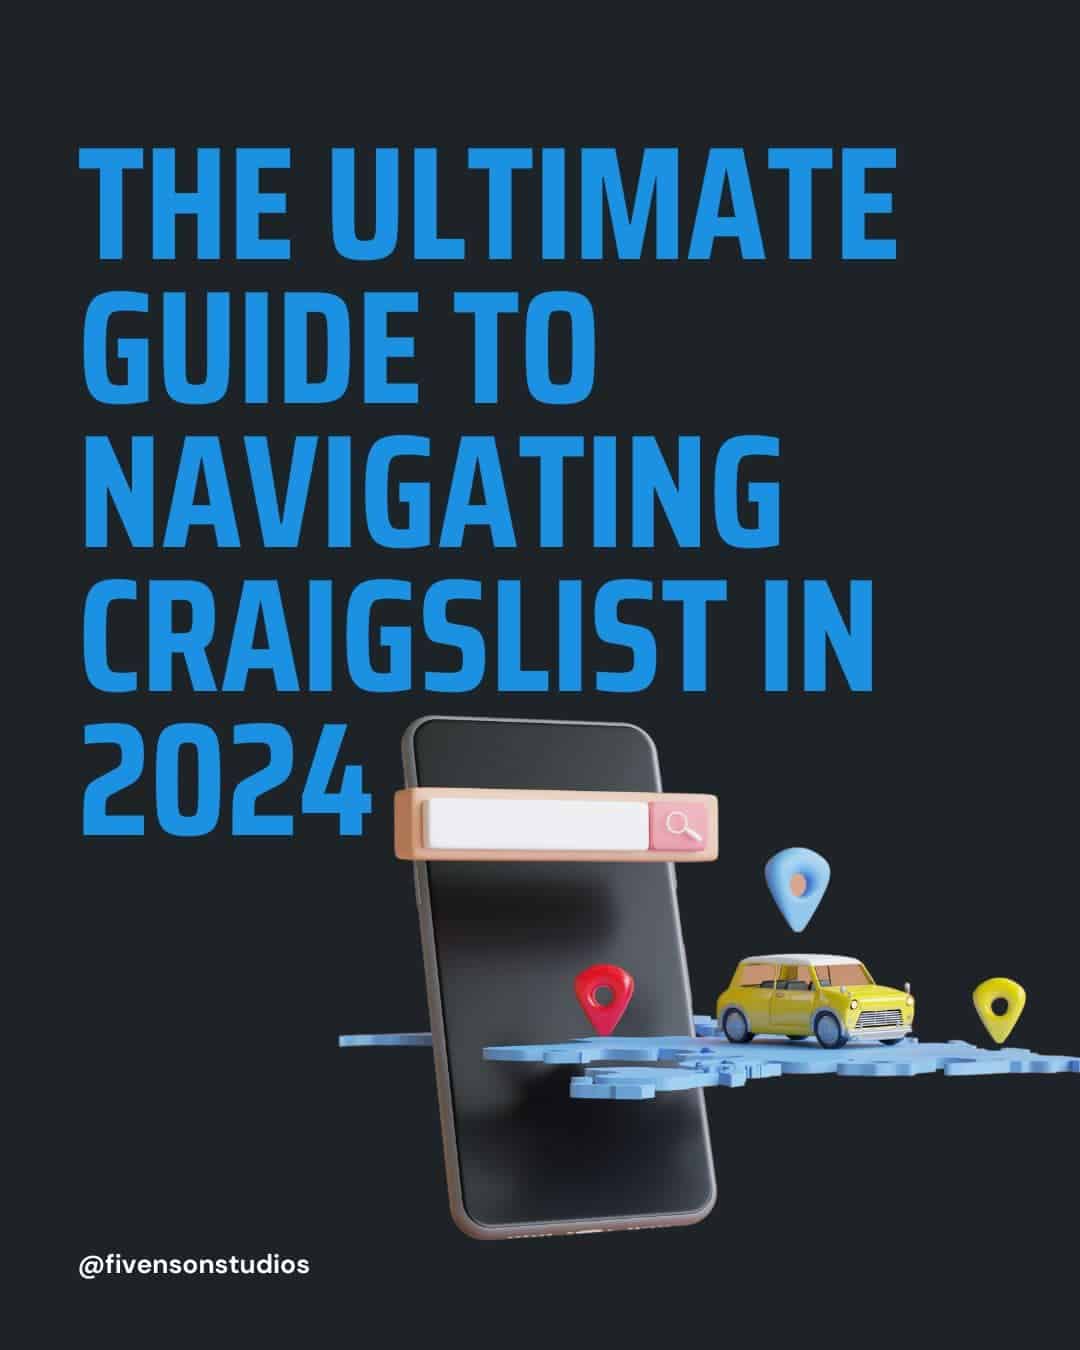 The Ultimate Guide to Navigating Craigslist in 2024-Fivenson Studios